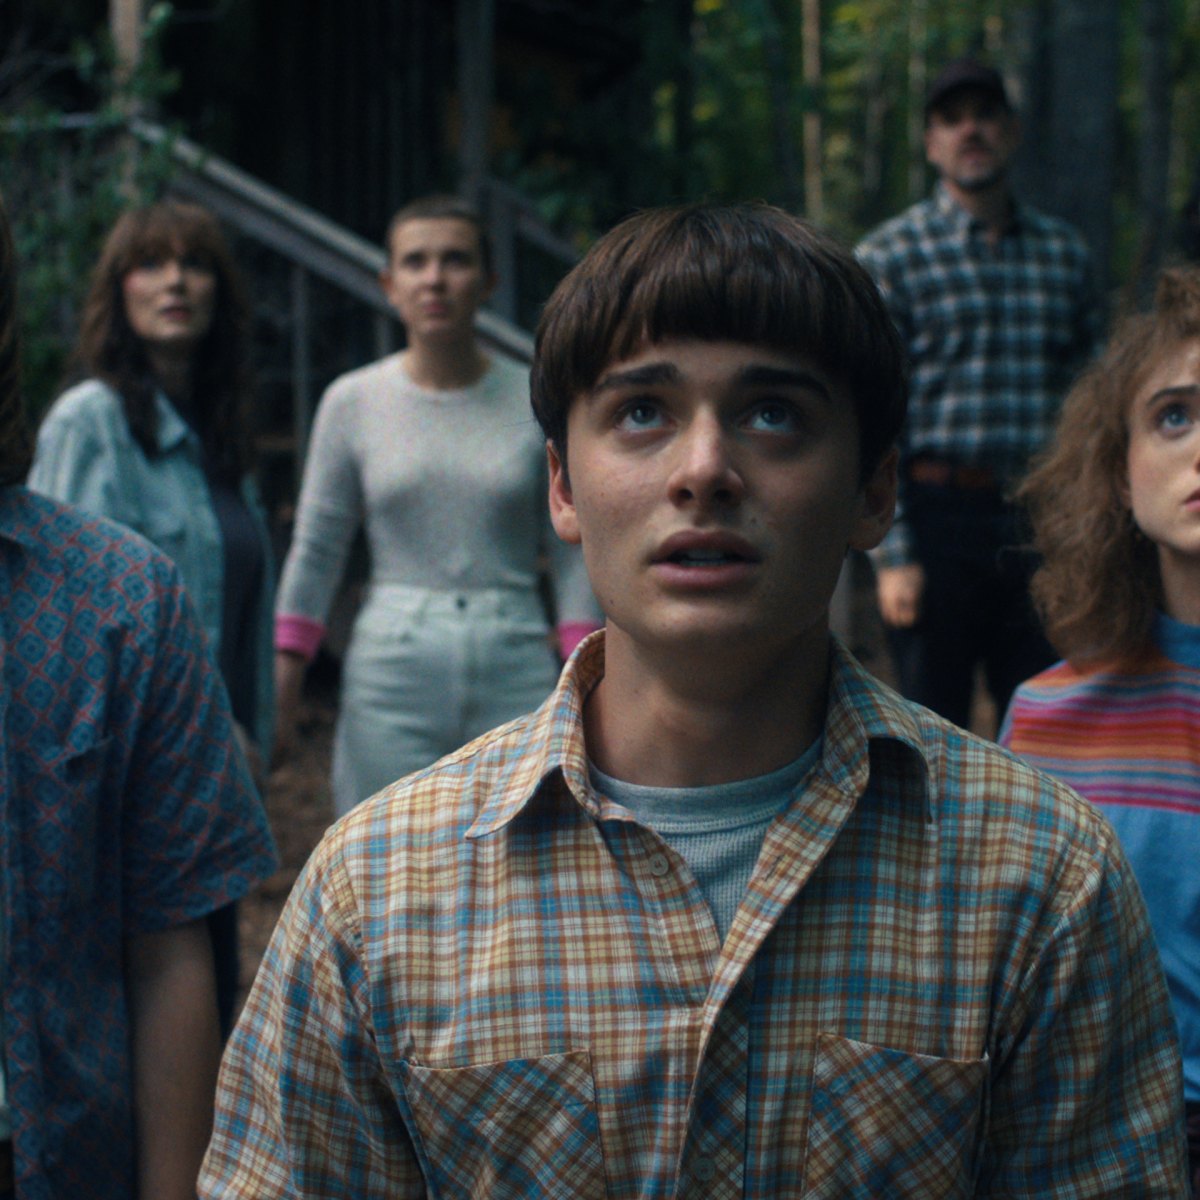 Stranger Things Creators' Notes Confirm Will Byers Has 'Sexual